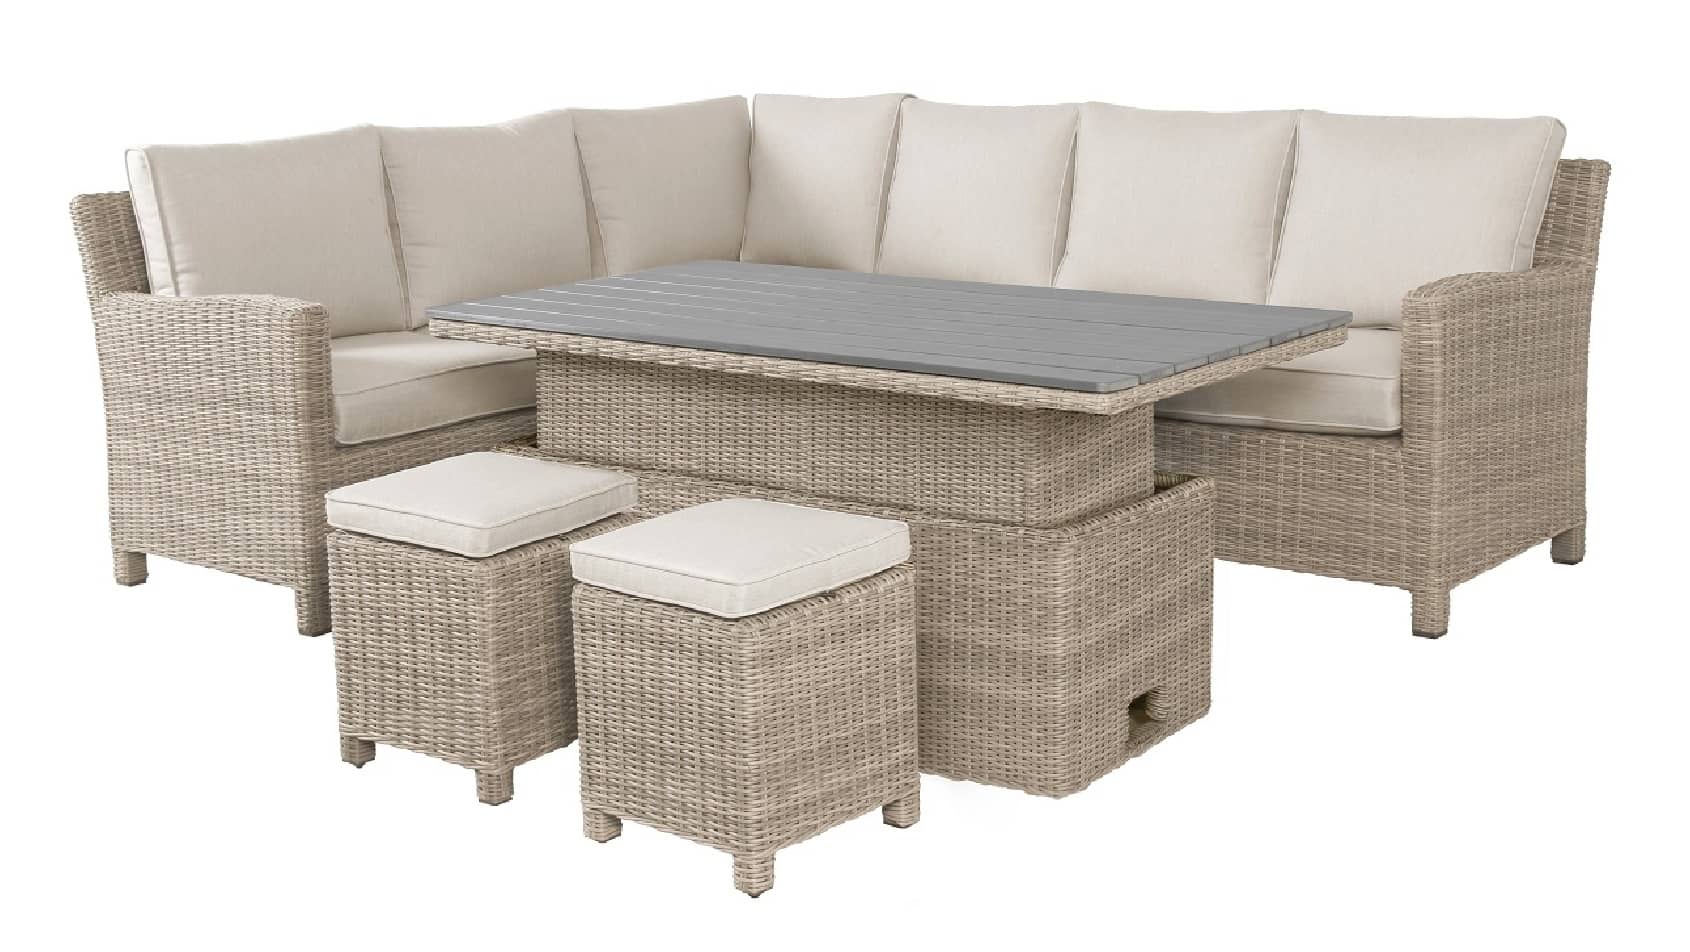 Kettler Palma casual dining corner set RHS with height adjustable table Oyster